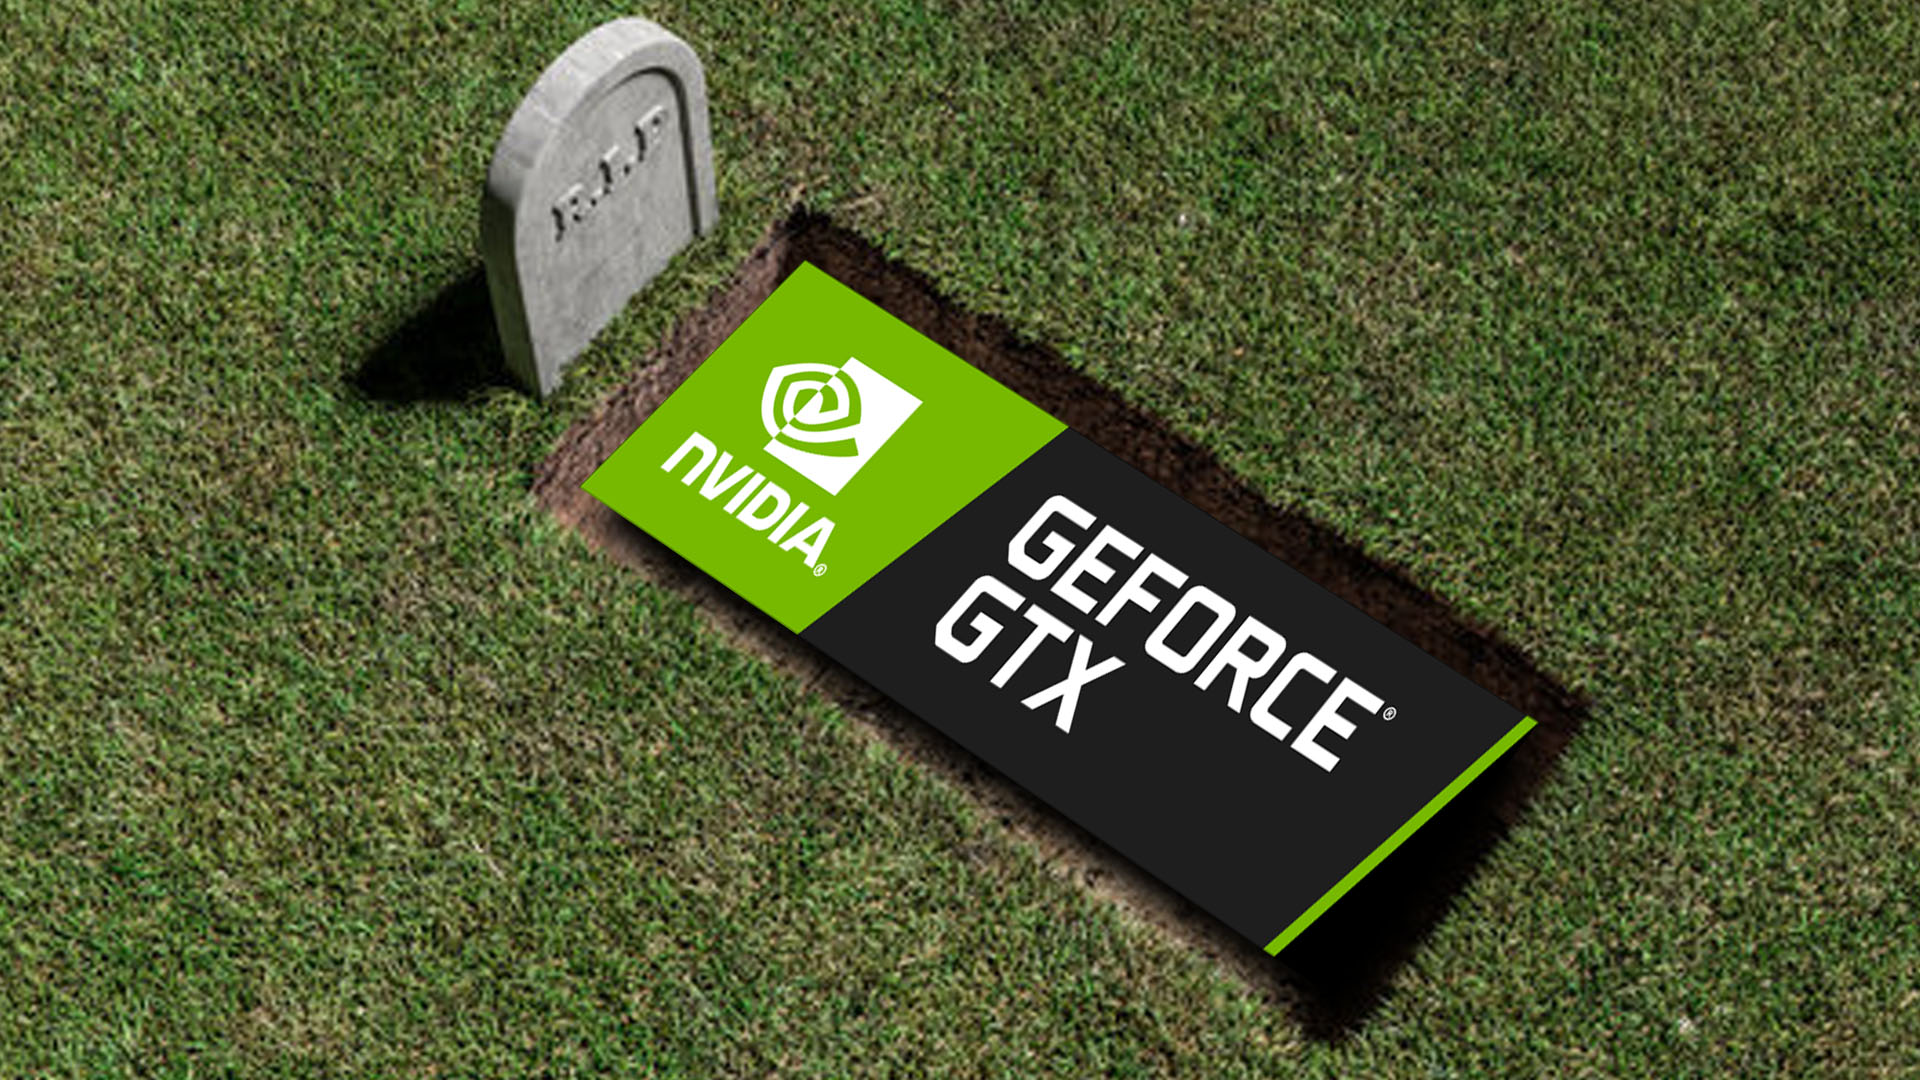 Goodbye, Nvidia GeForce GTX era: Tech giant shifts focus to new products